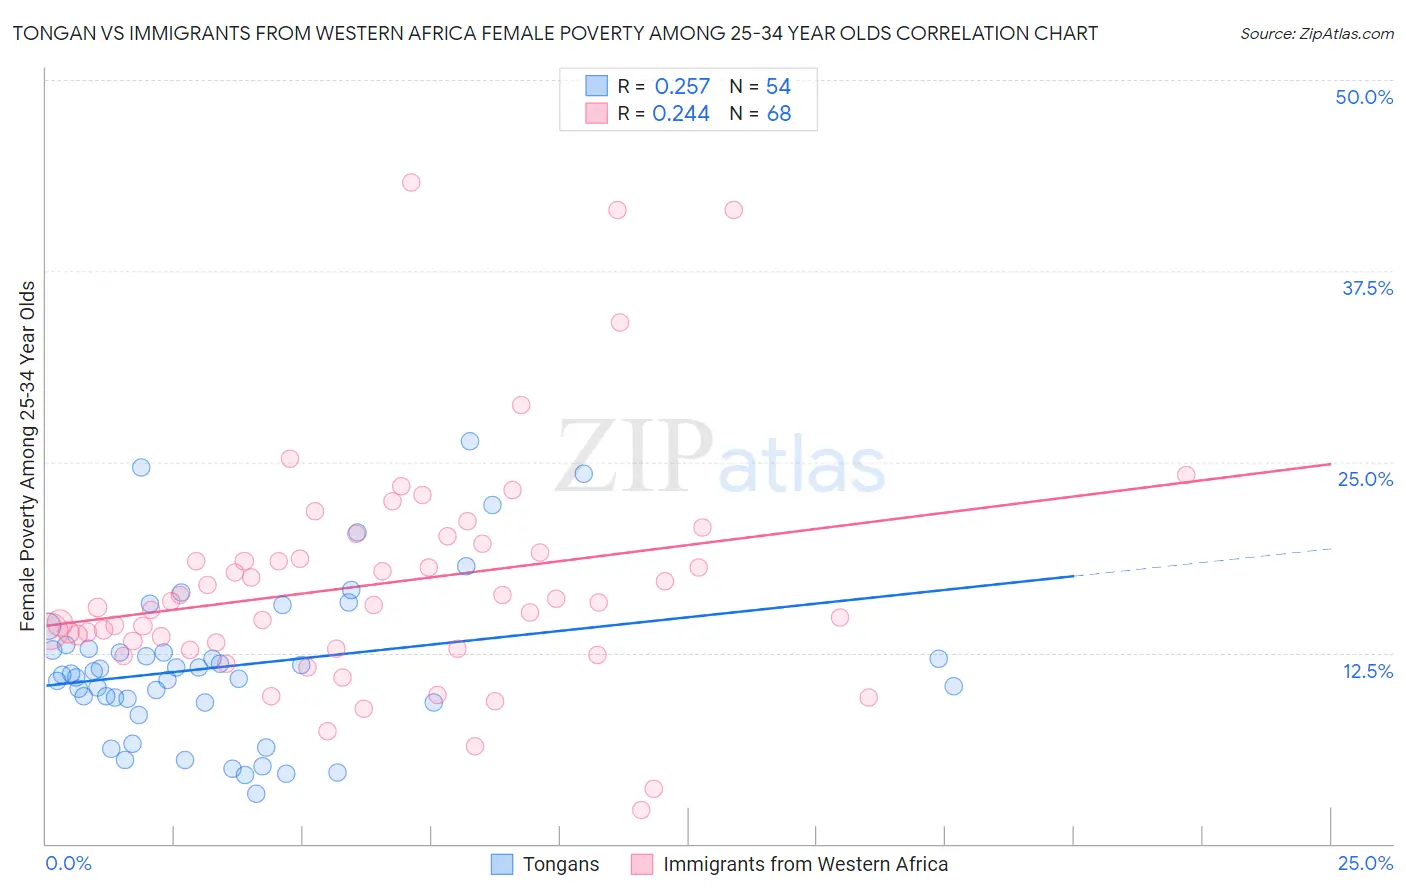 Tongan vs Immigrants from Western Africa Female Poverty Among 25-34 Year Olds